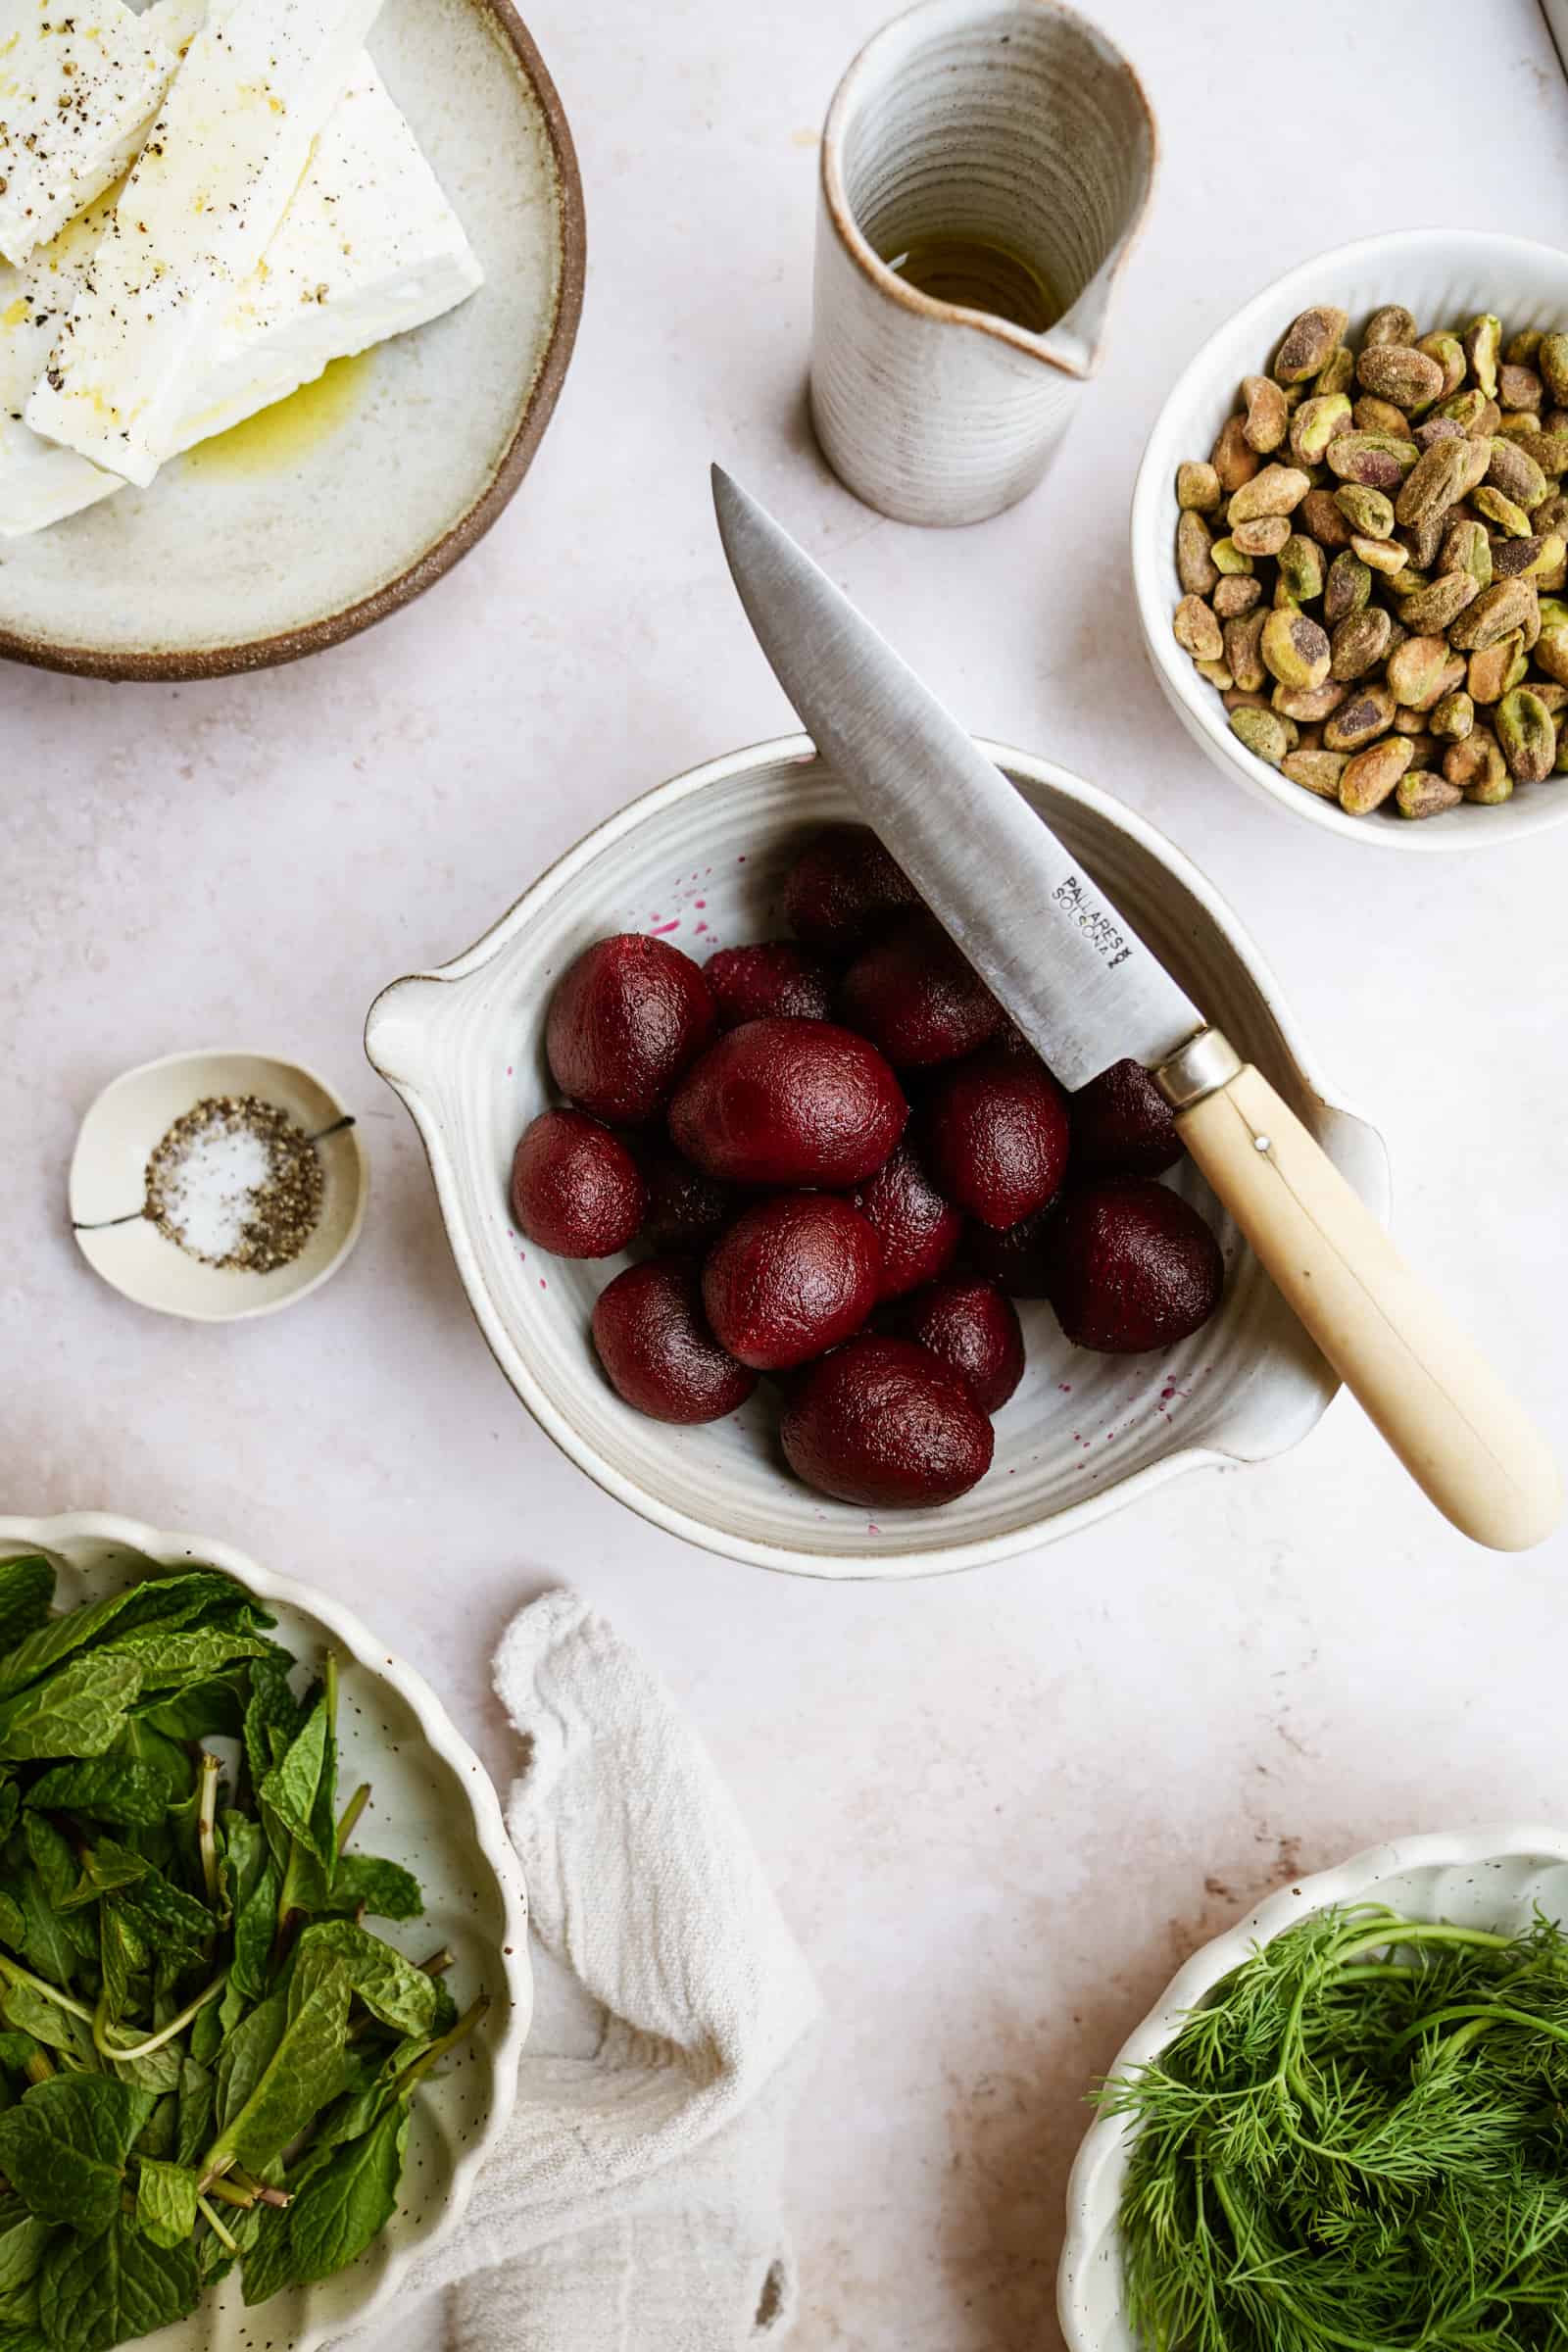 Ingredients for Roasted Beet Salad with Feta